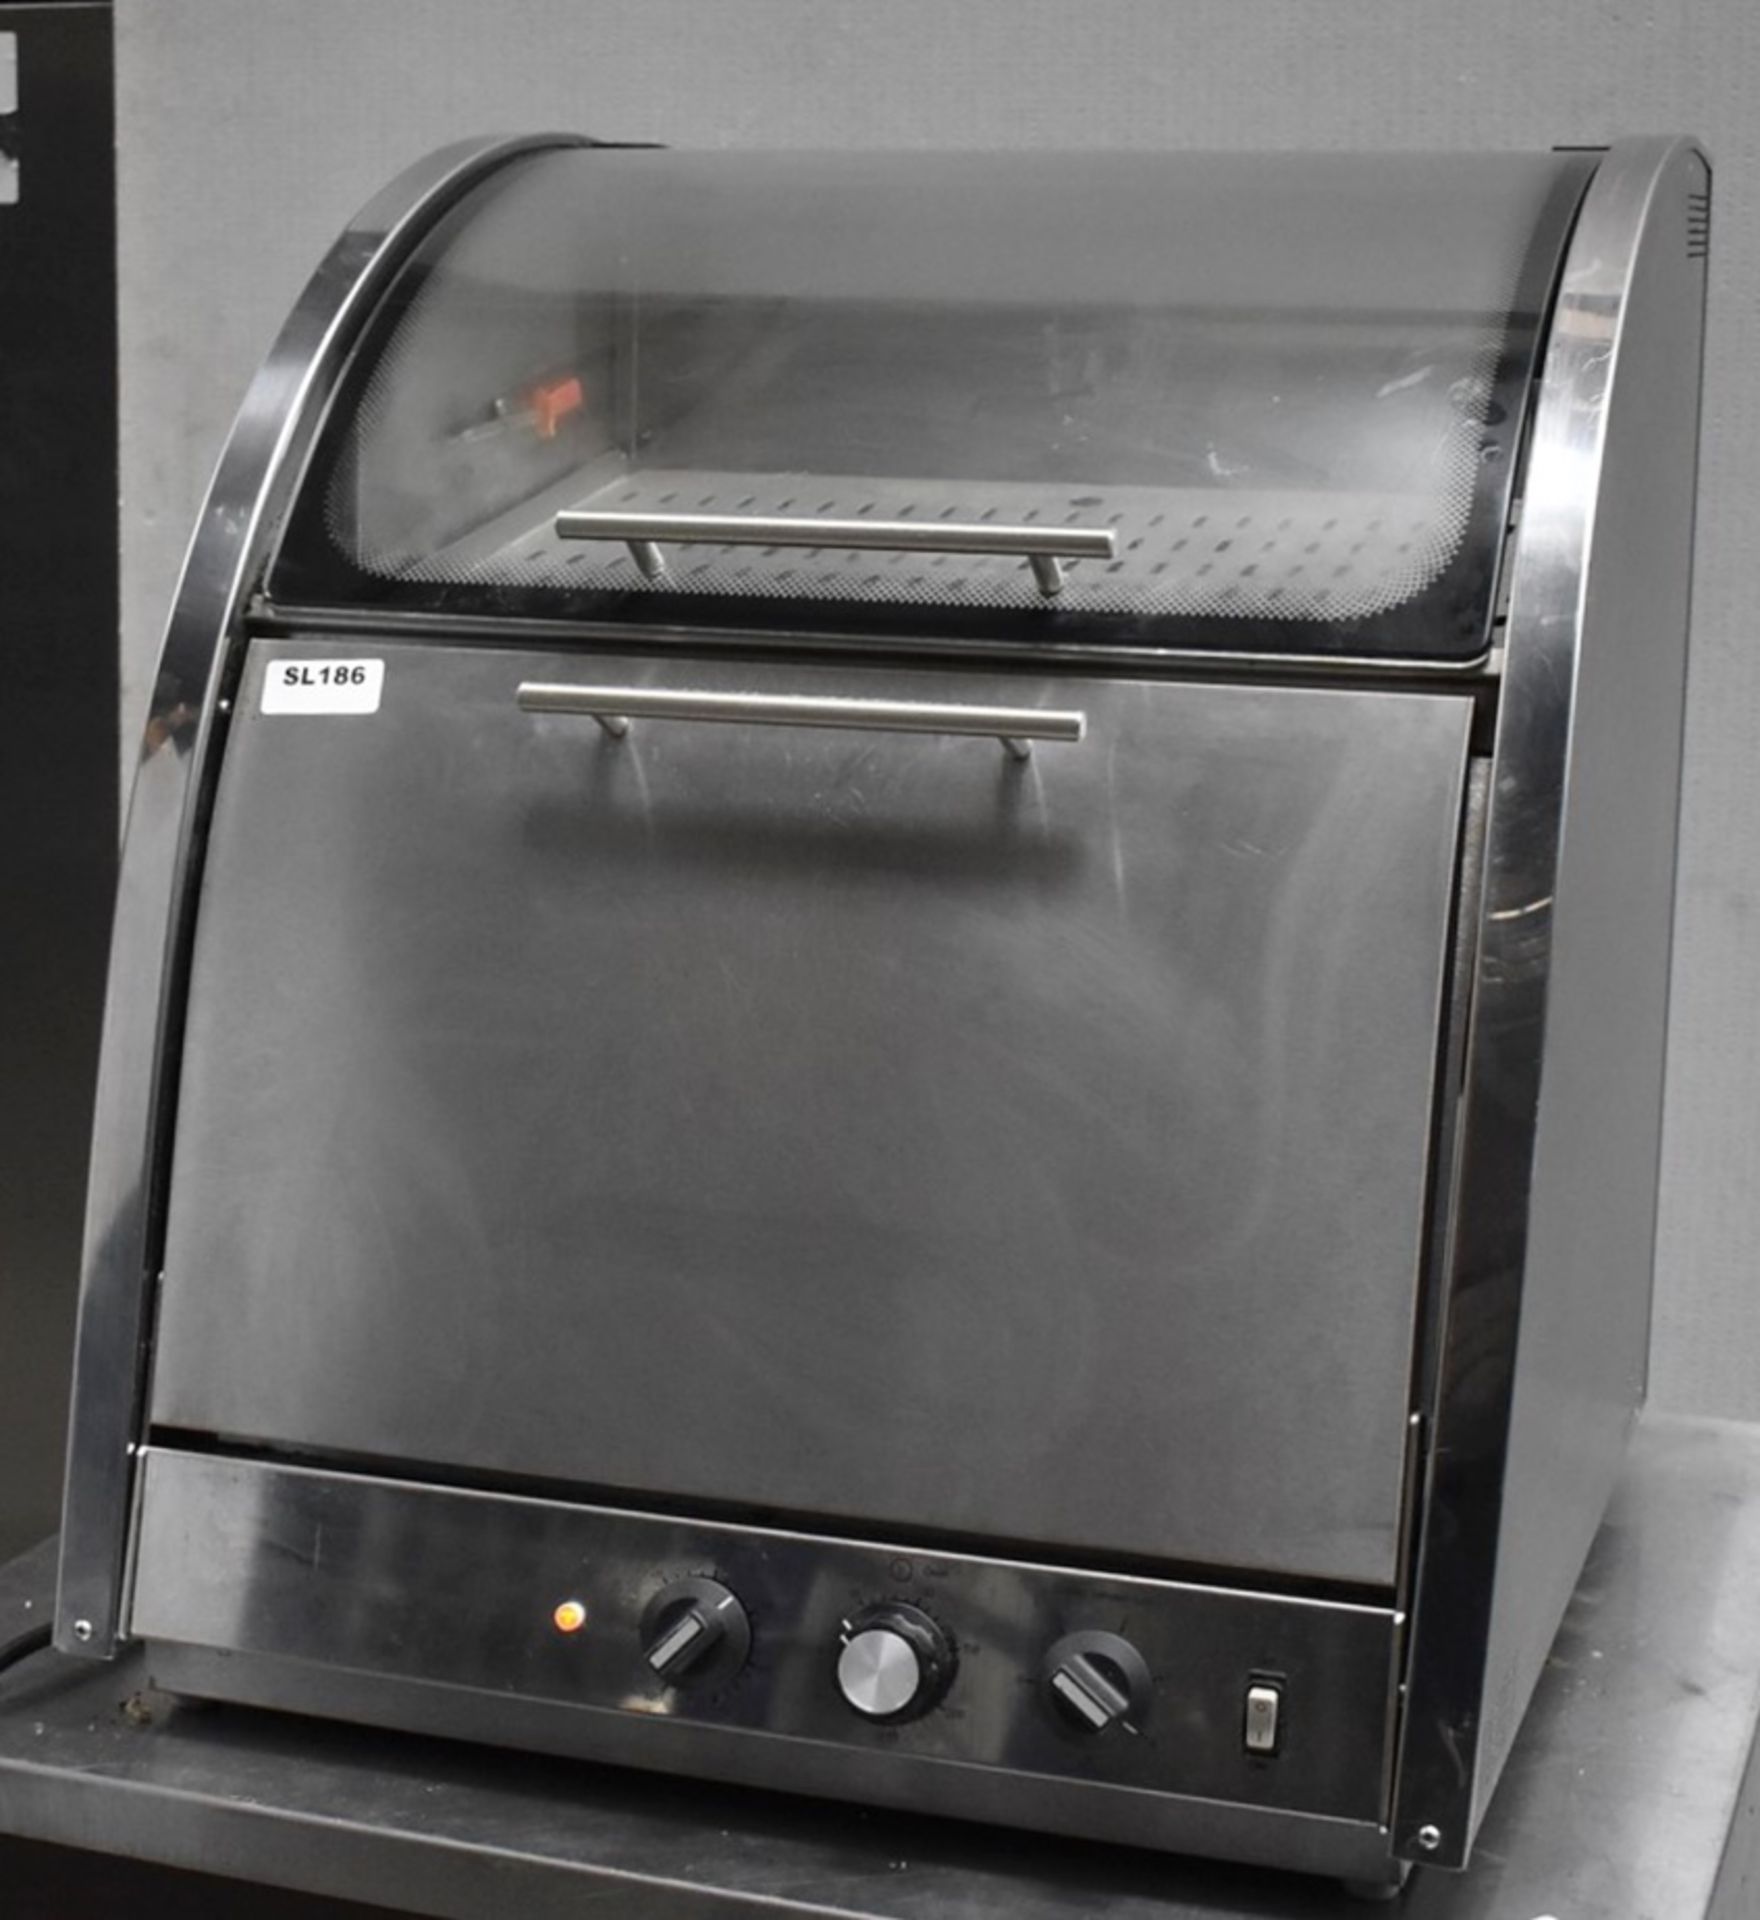 1 x Countertop Oven With Food Warmer Display - Dimensions: H63 x W55 x D56 cms - Recently Removed - Image 13 of 14